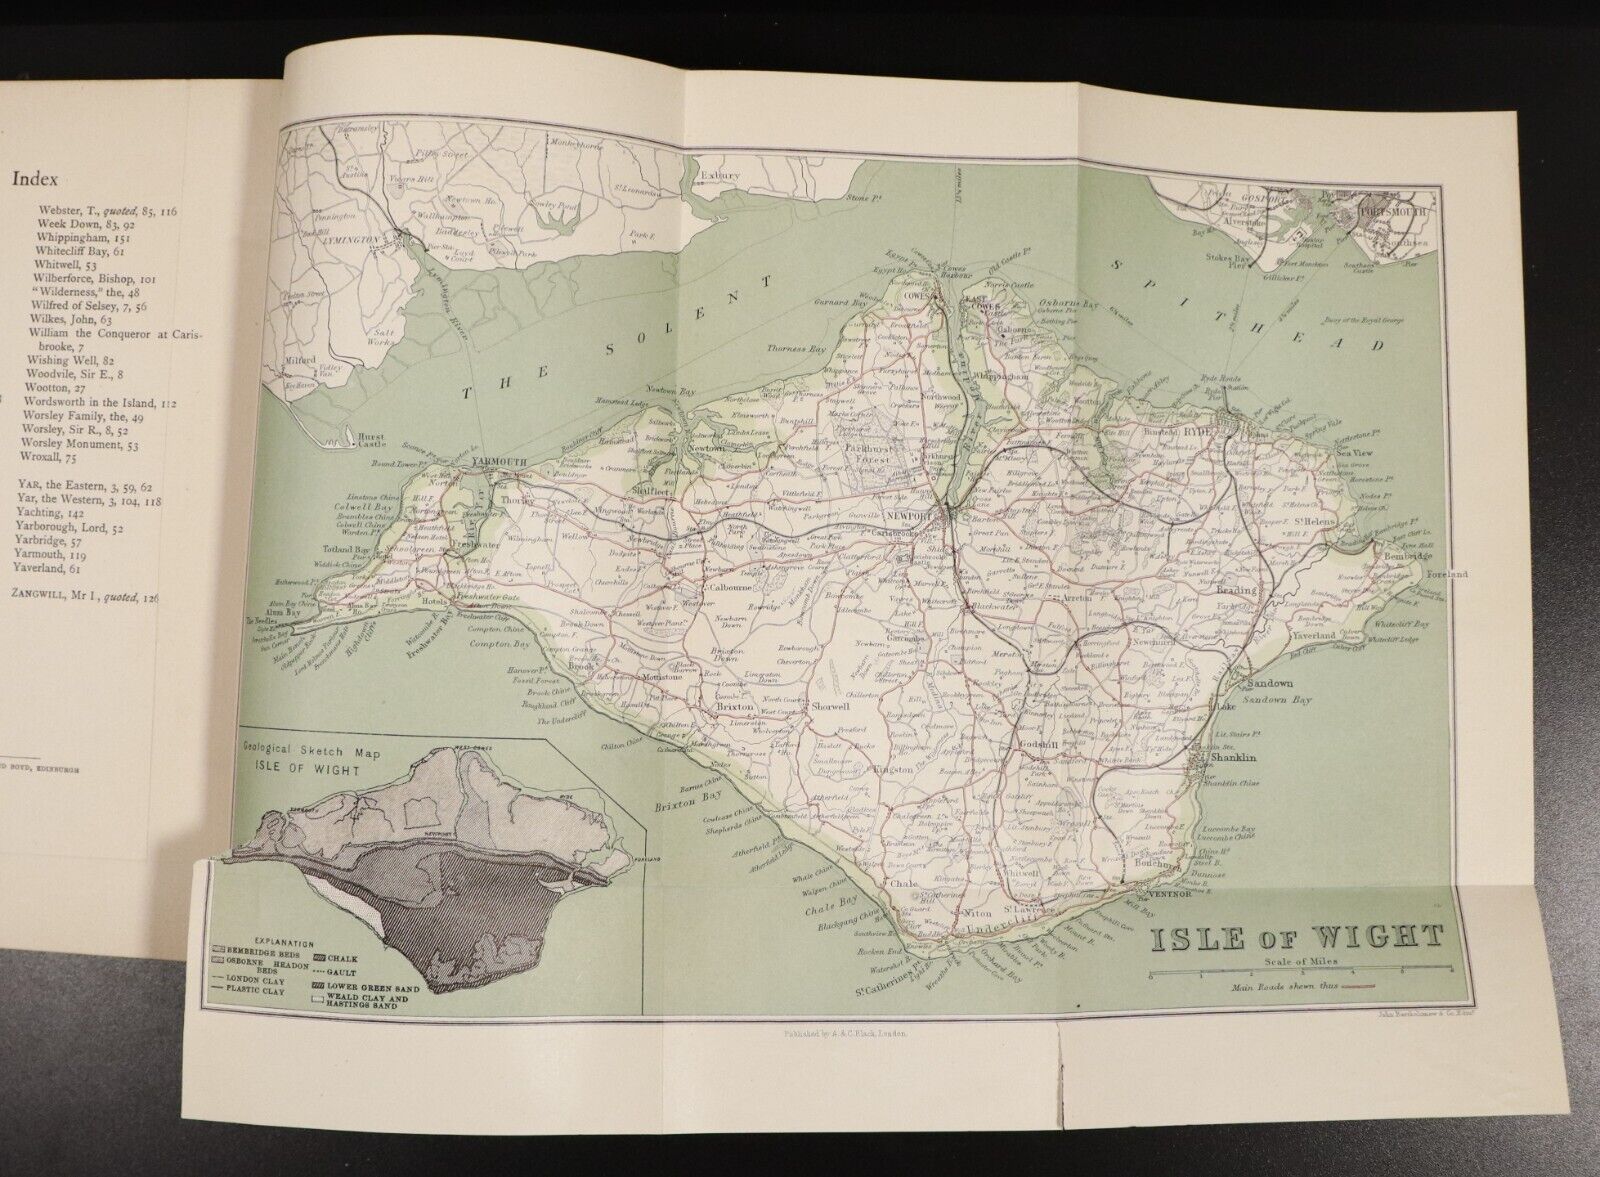 1908 Isle Of Wight by AR Hope Moncrieff & A Heaton Cooper Antique Book w/Map